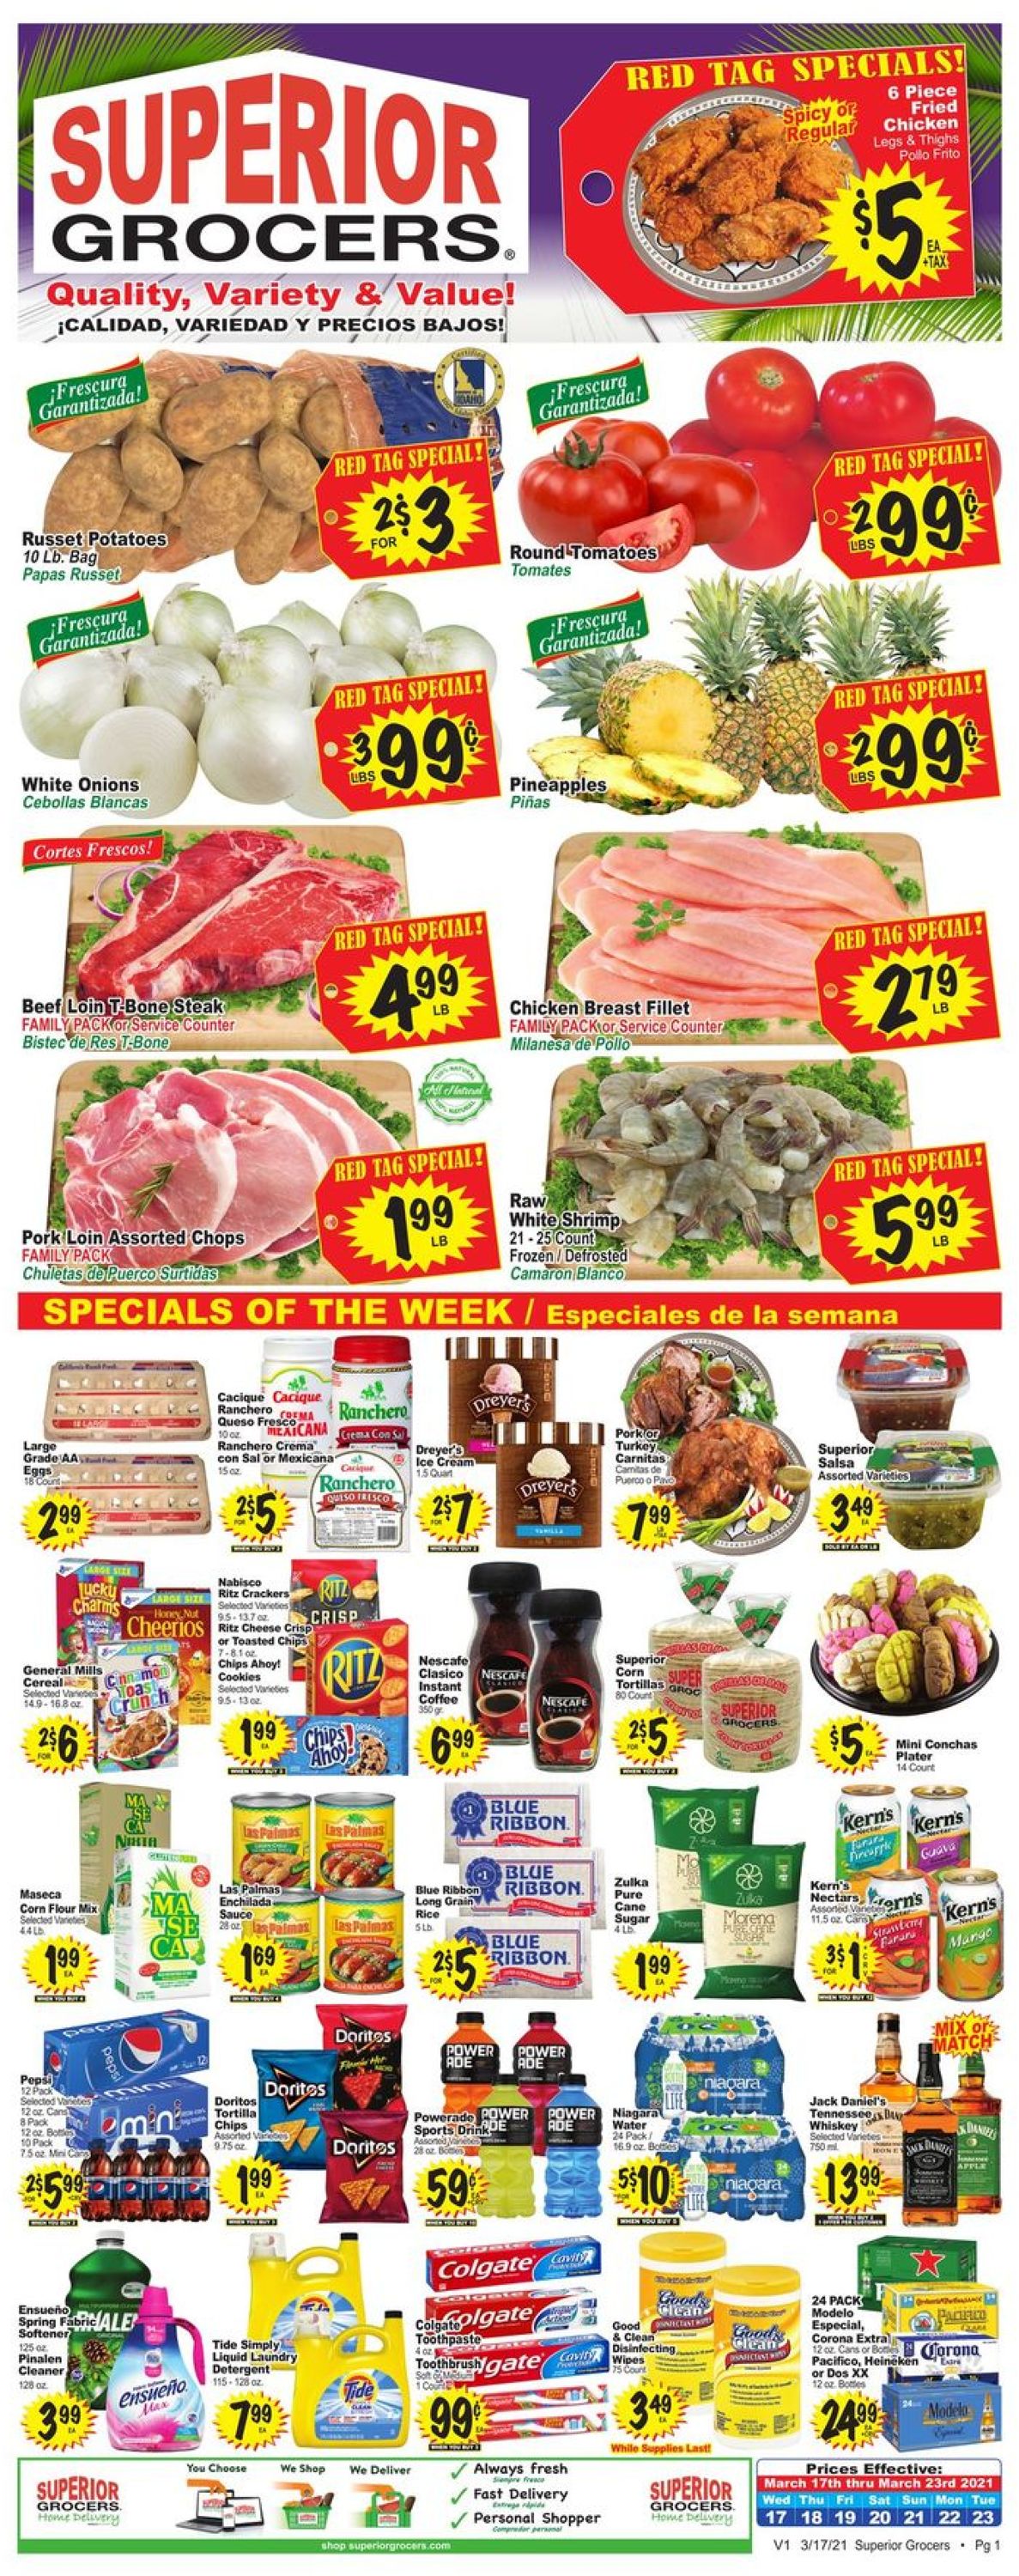 Superior Grocers Current weekly ad 03/17 - 03/23/2021 - frequent-ads.com